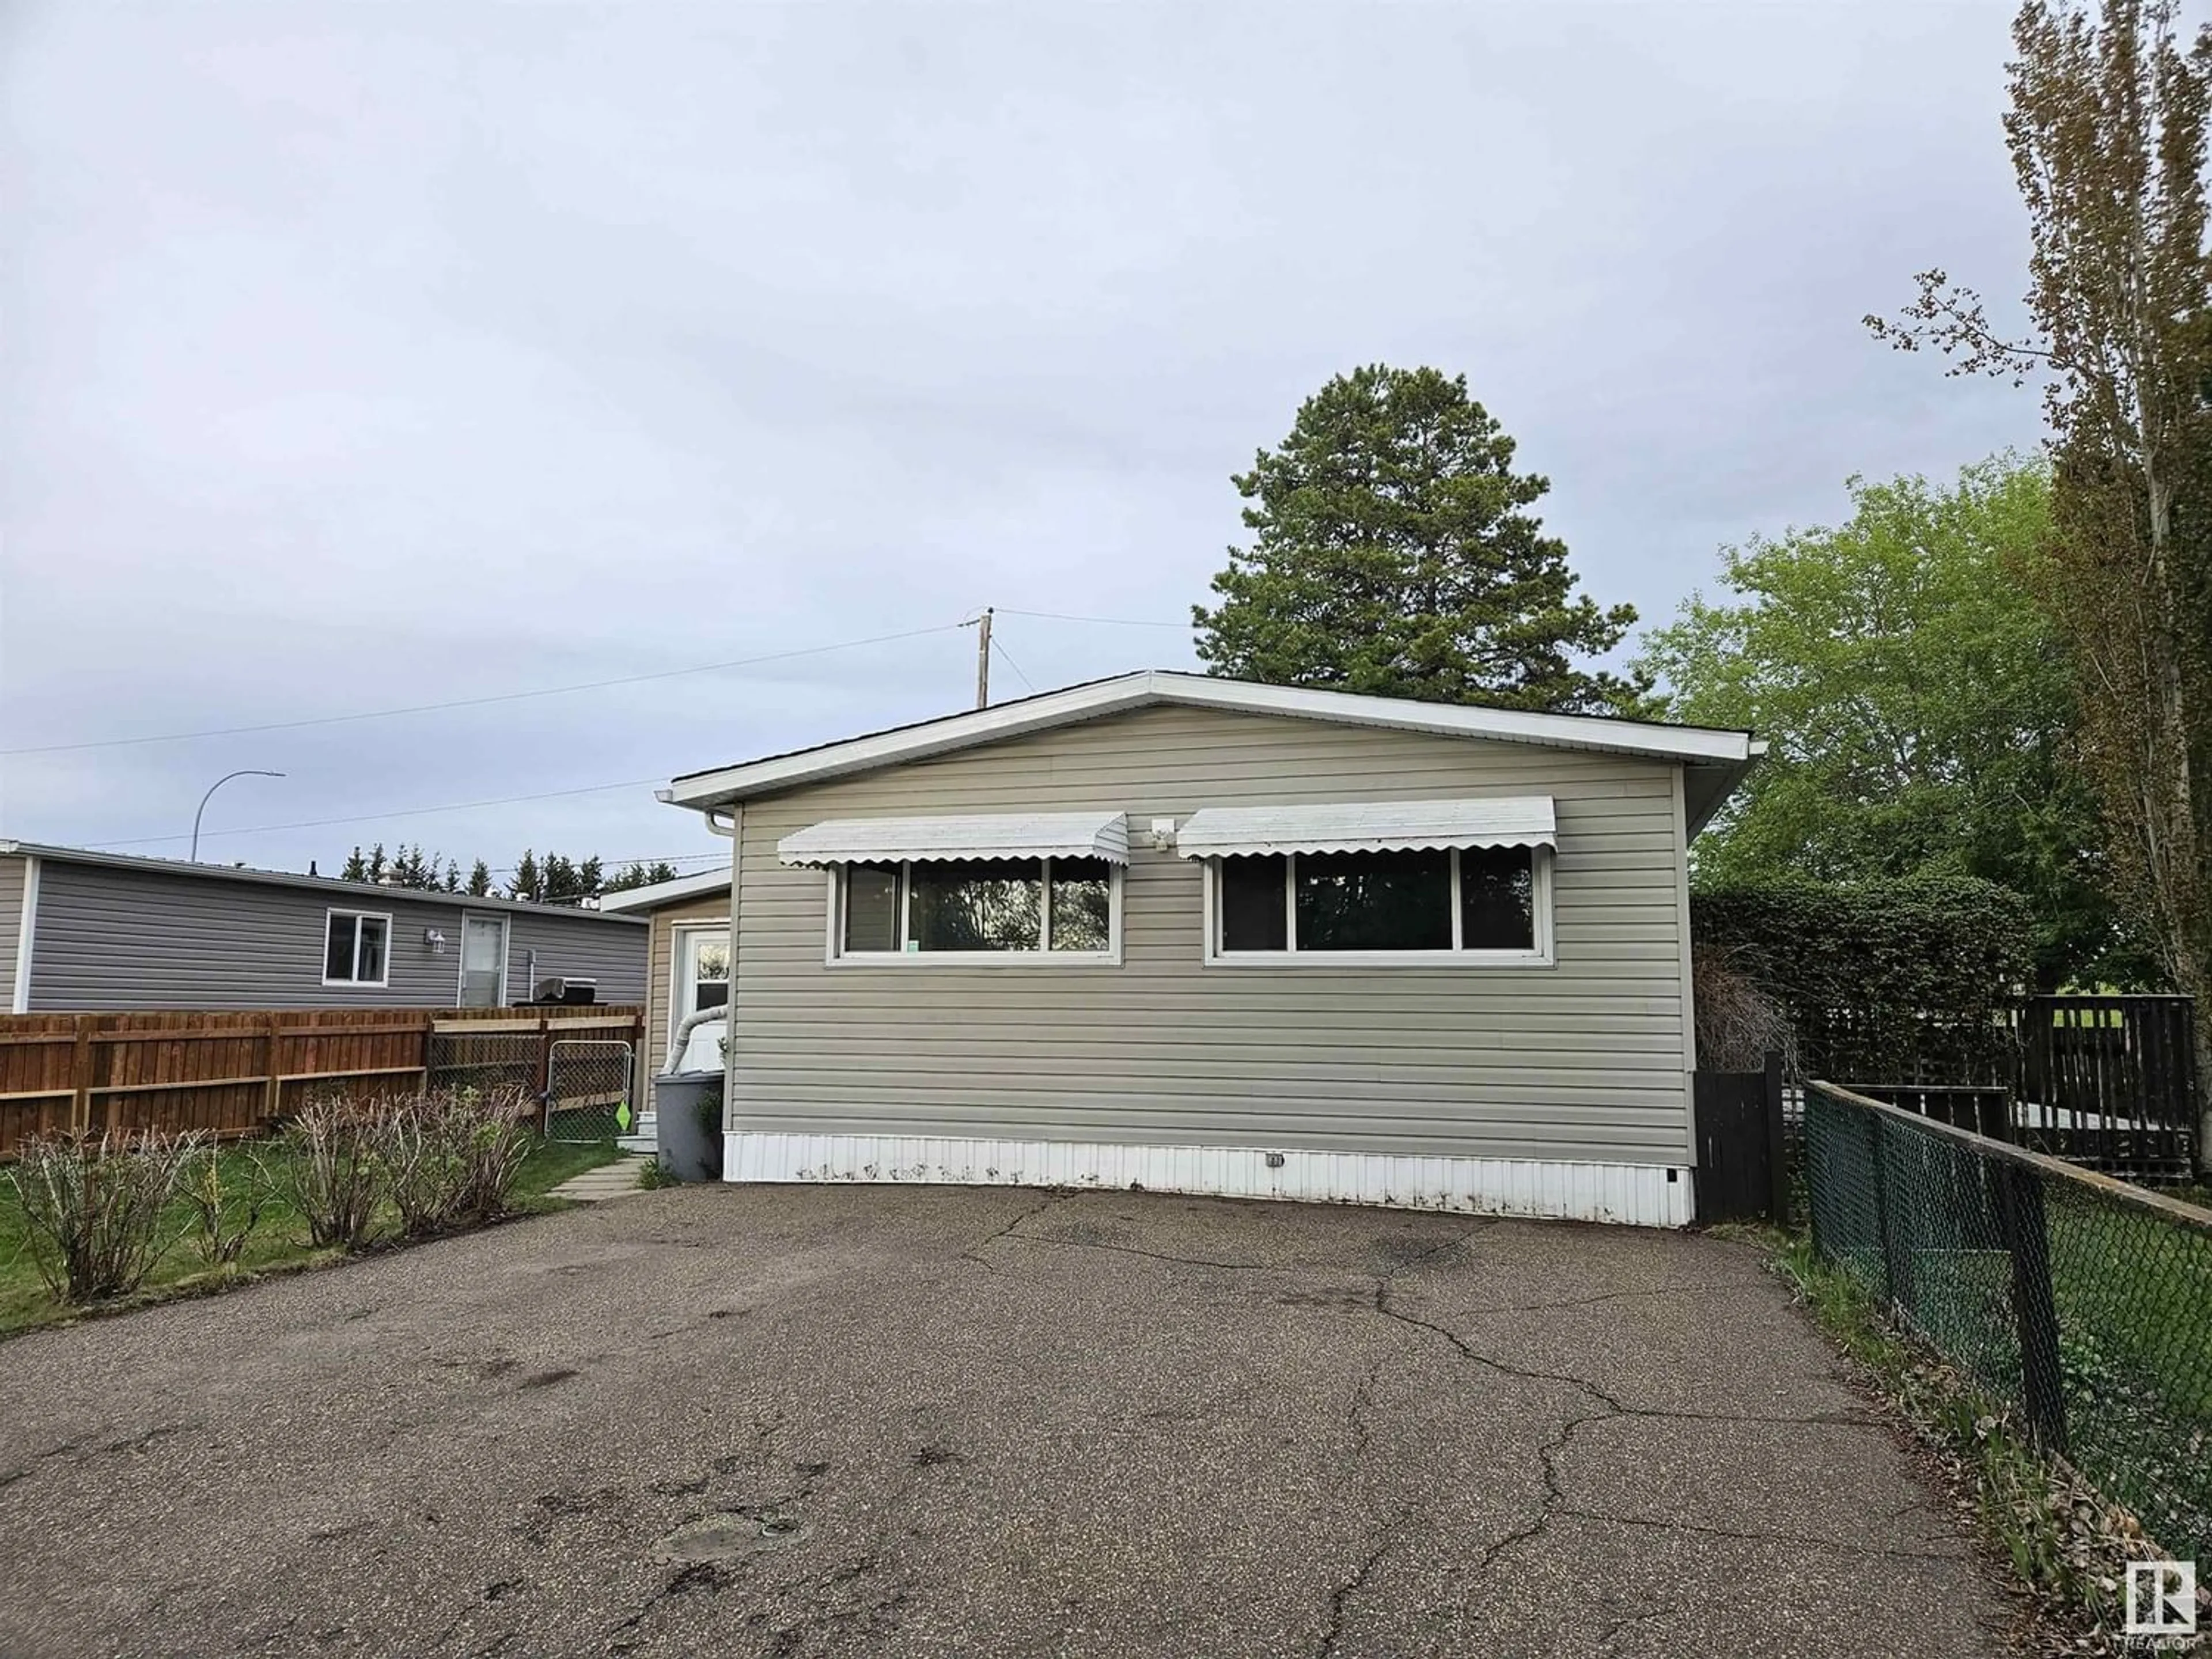 Outside view for 1 305 CALAHOO RD, Spruce Grove Alberta T7X3K6